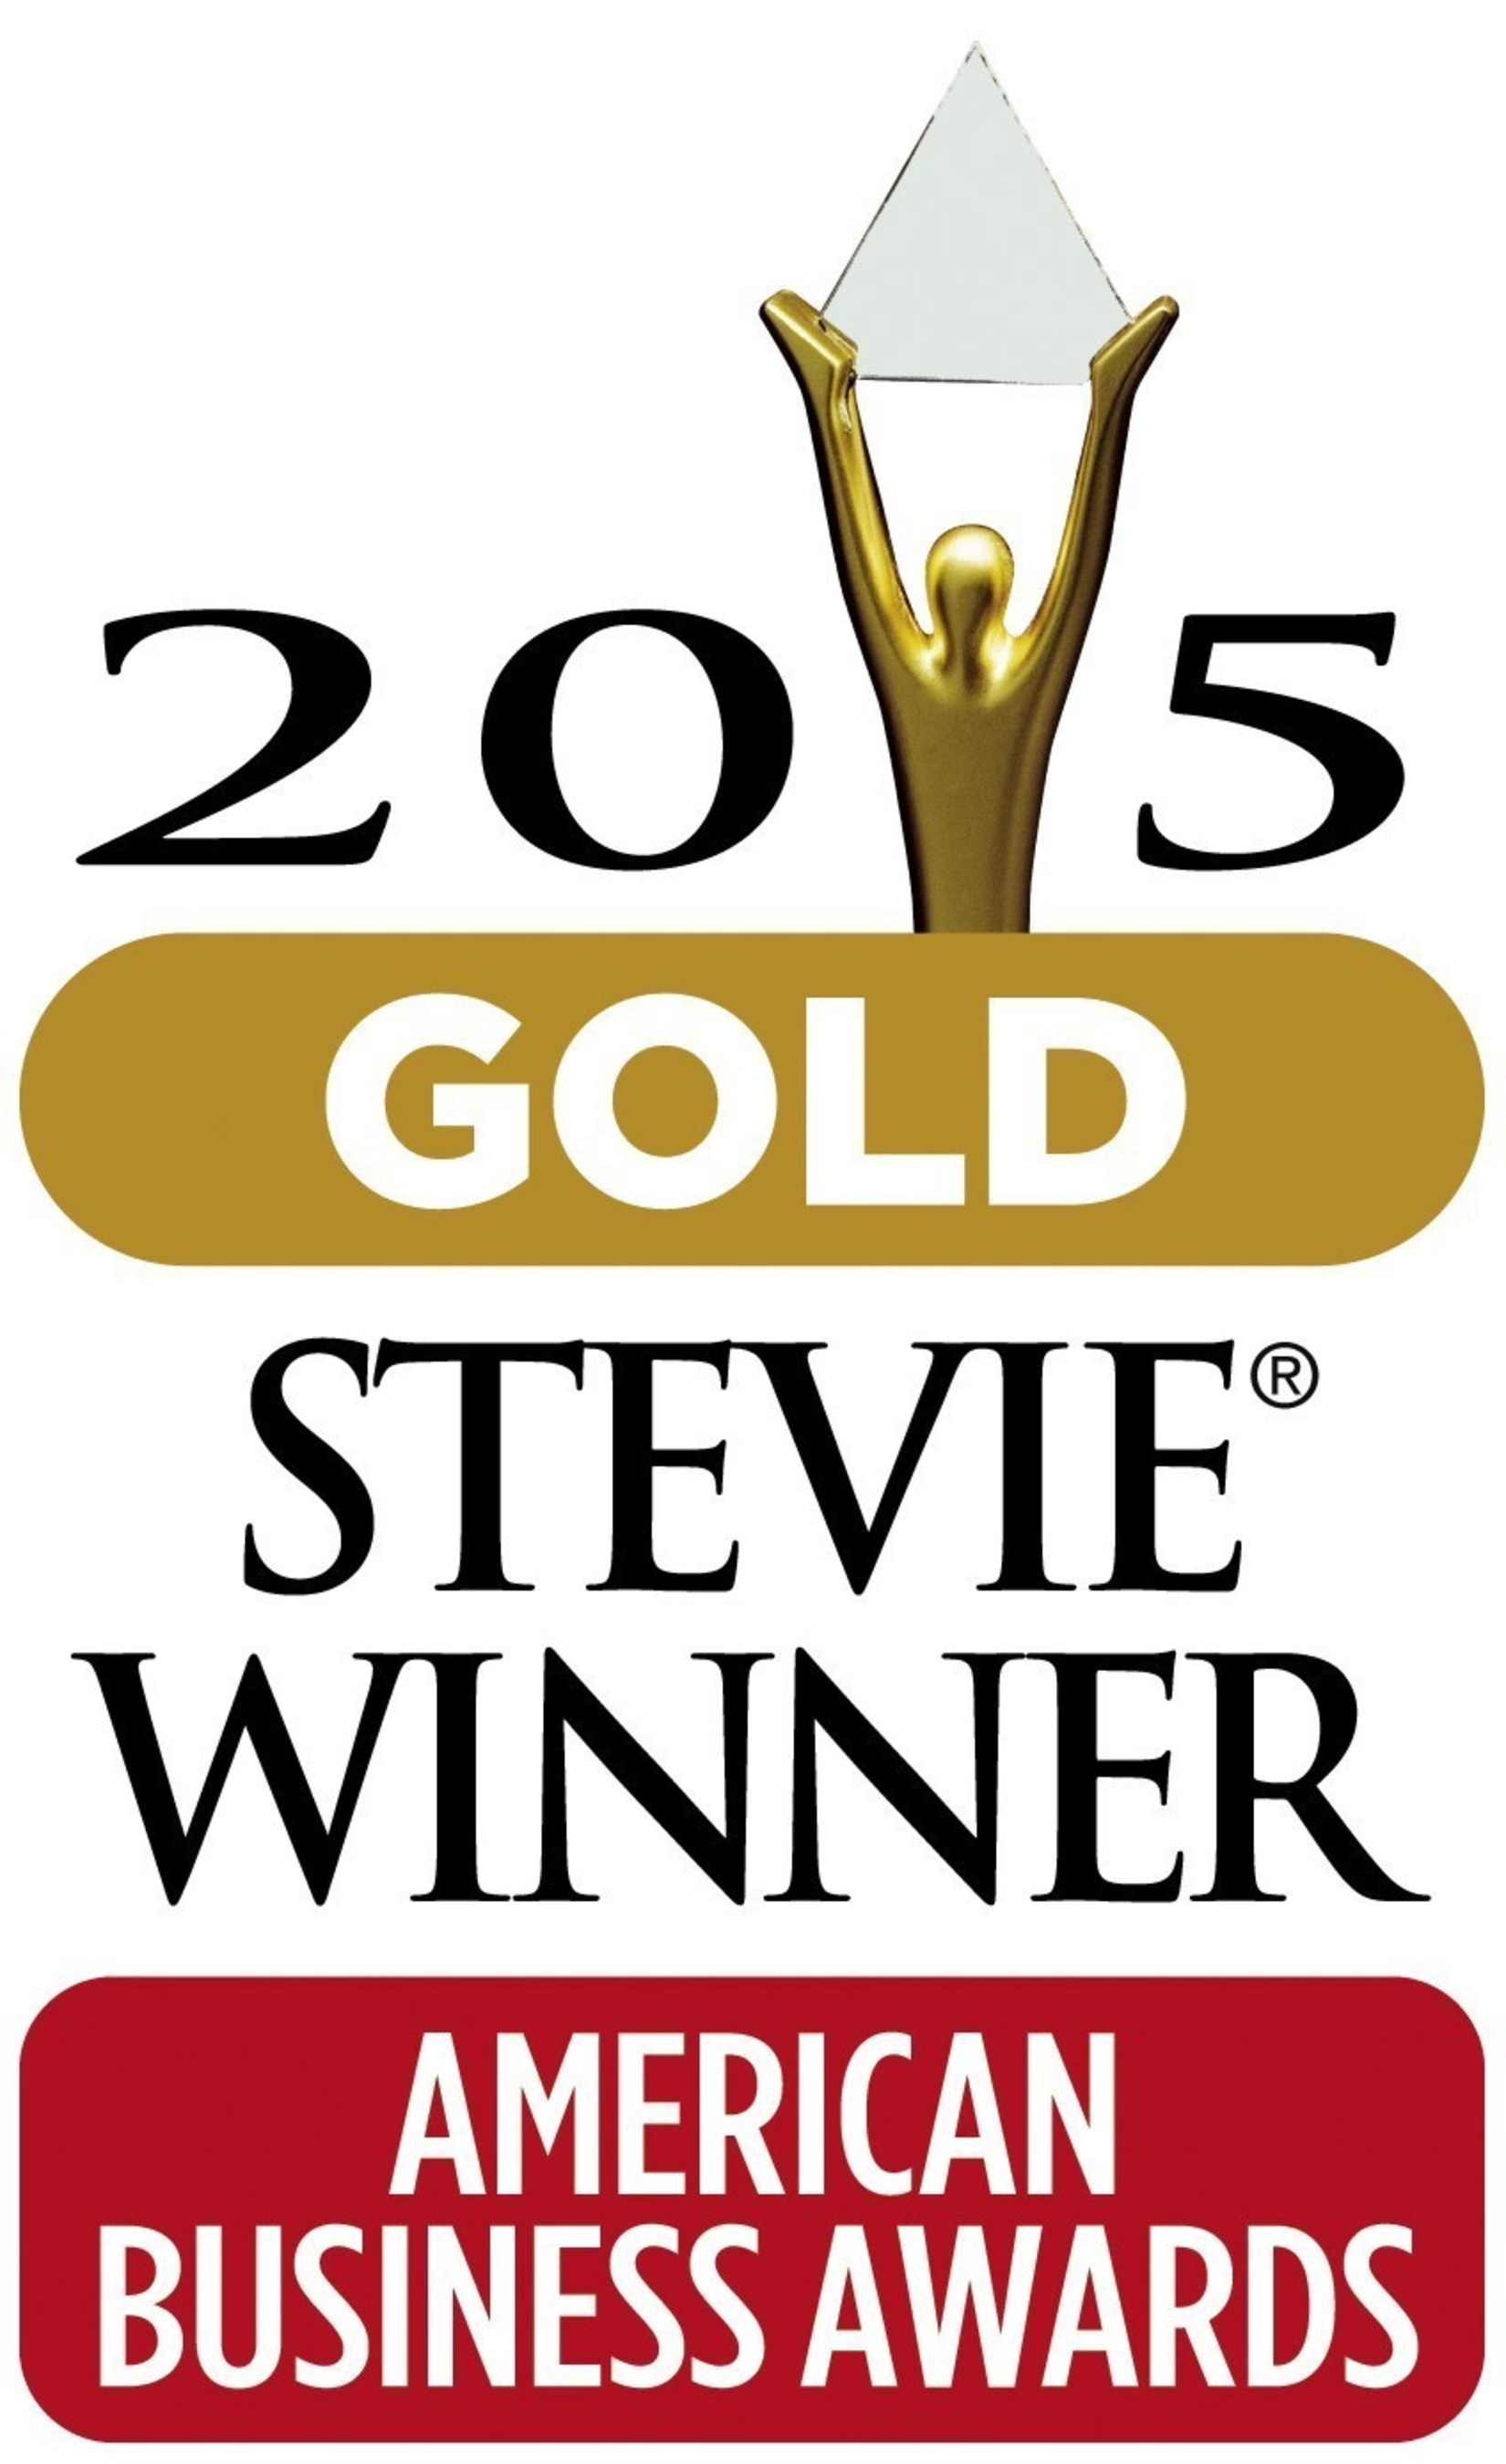 Teletrac wins the Gold Stevie for the Most Innovative Company in 2015 Award.